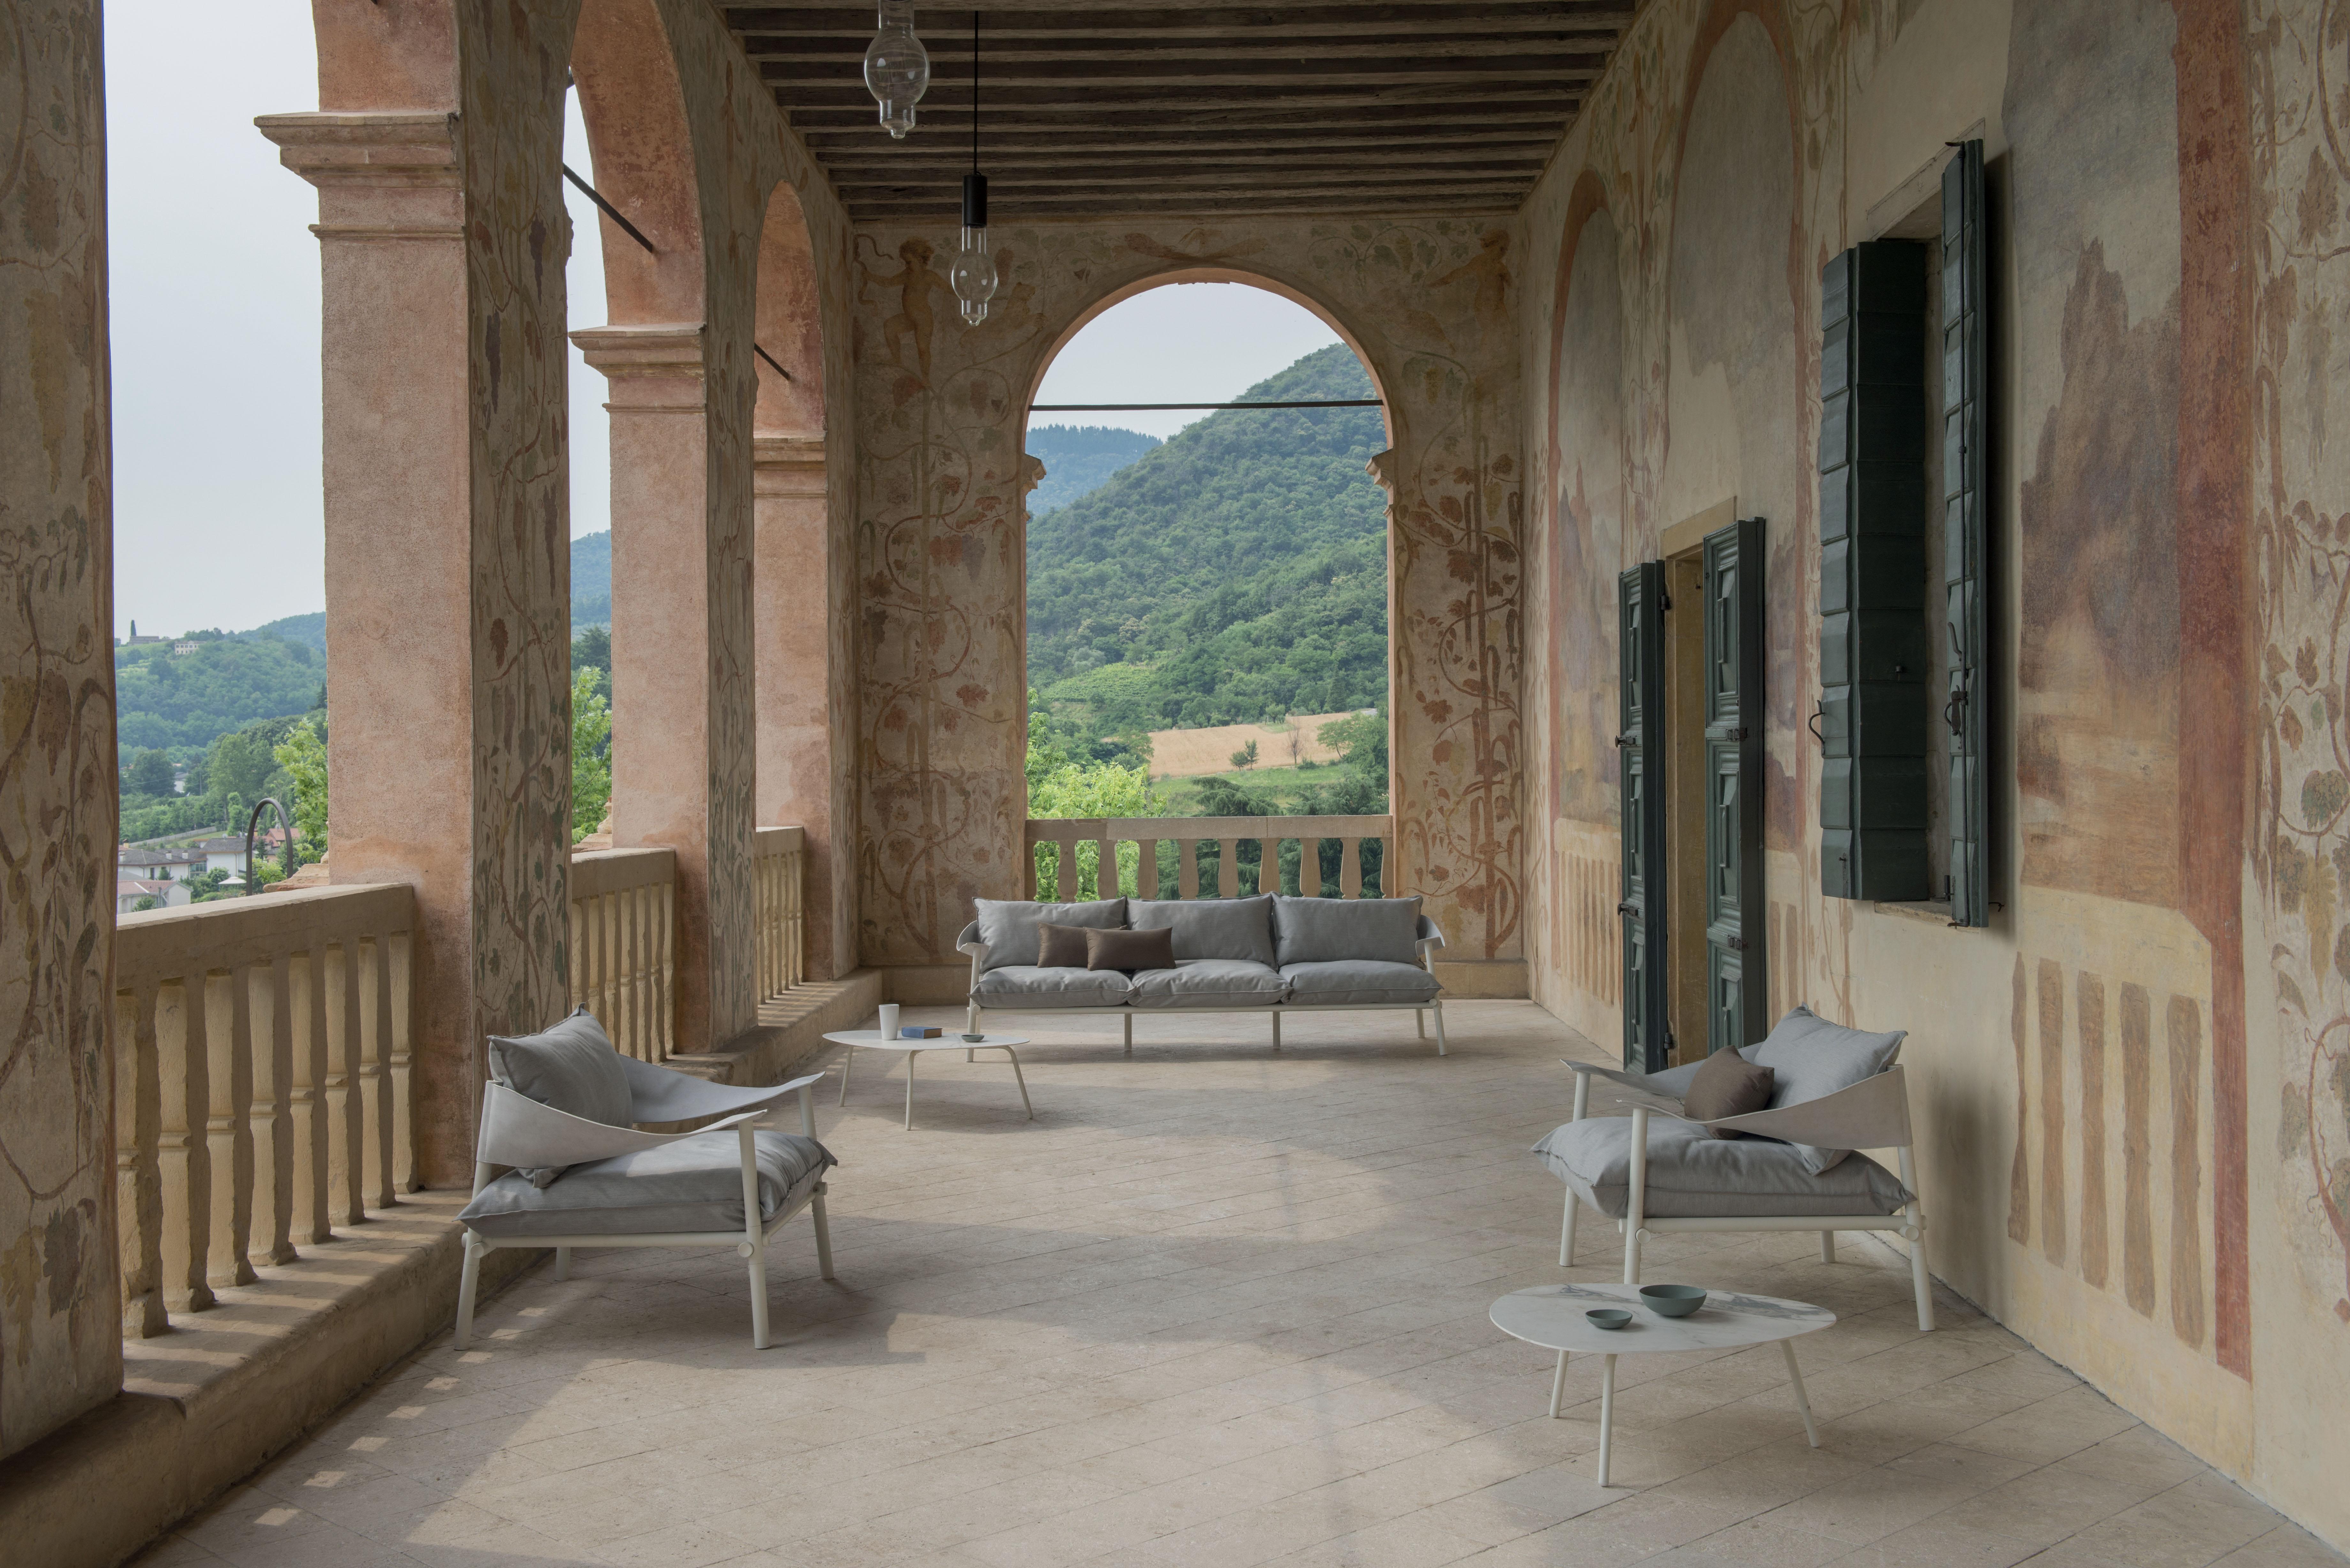 Attractive shapes and large dimensions characterise the Terramare sofa collection by Studio Chiaramonte/ Marin, designed to create cosy and personal settings both indoors and out. A complete range of furniture for dining and living areas.
The main